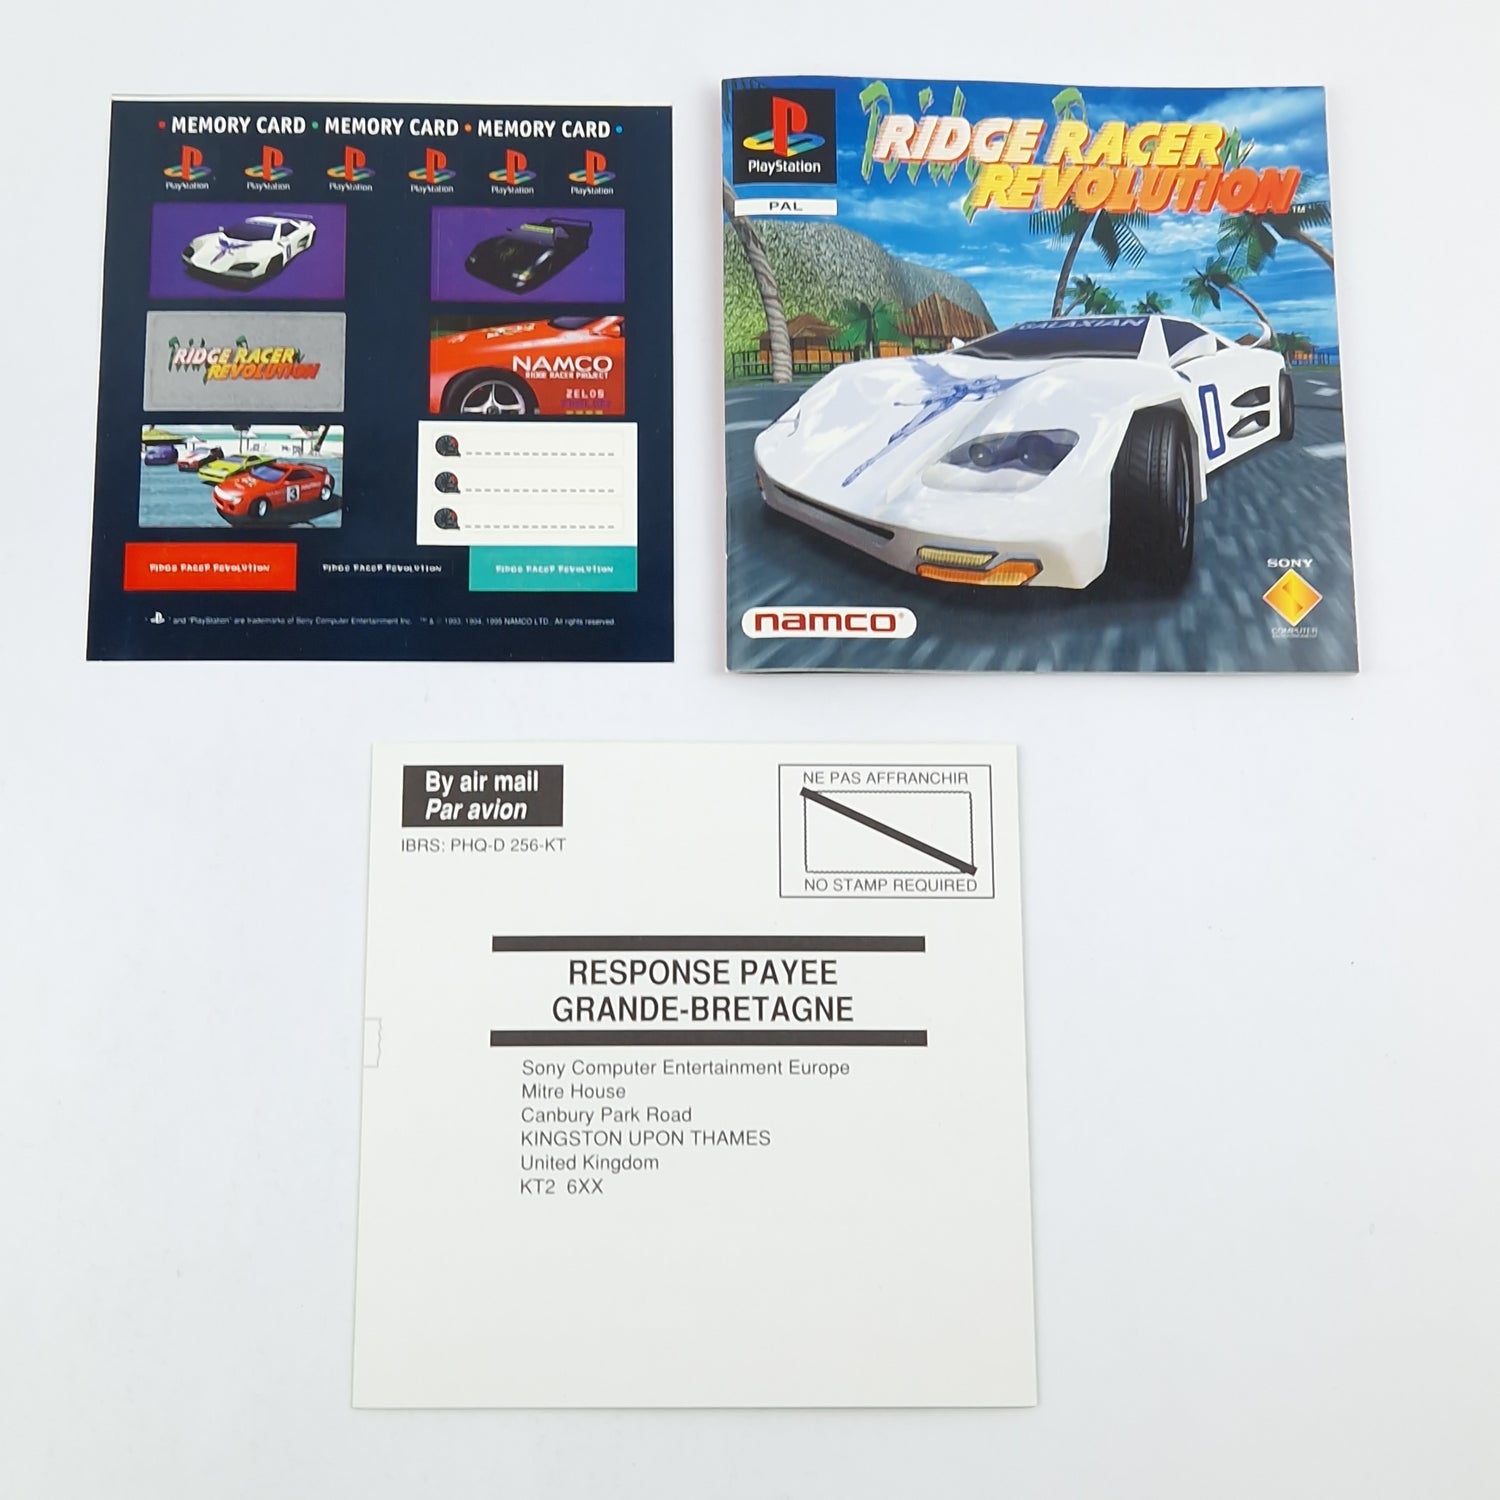 Playstation 1 game: Ridge Racer Revolution - CD instructions OVP | SONY PS1 PSX